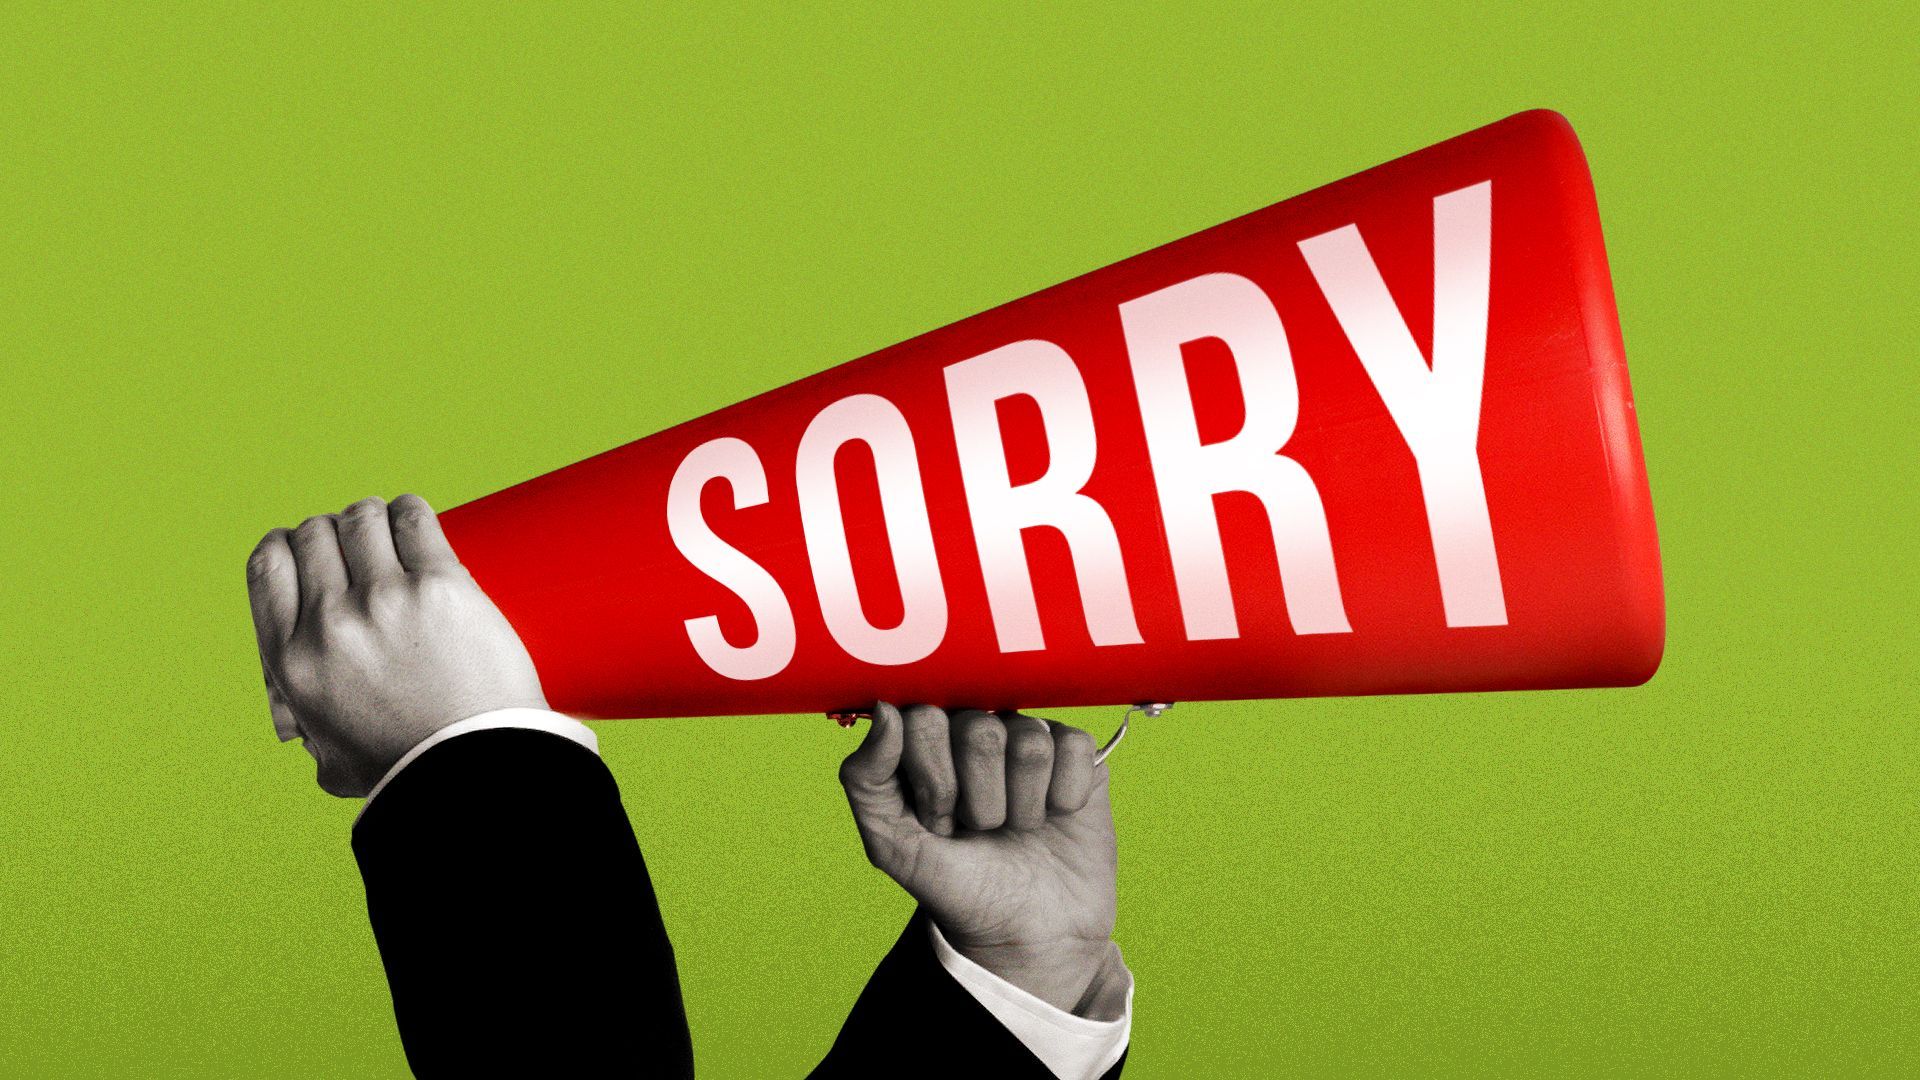 Illustration of a megaphone with "Sorry" written on the side.